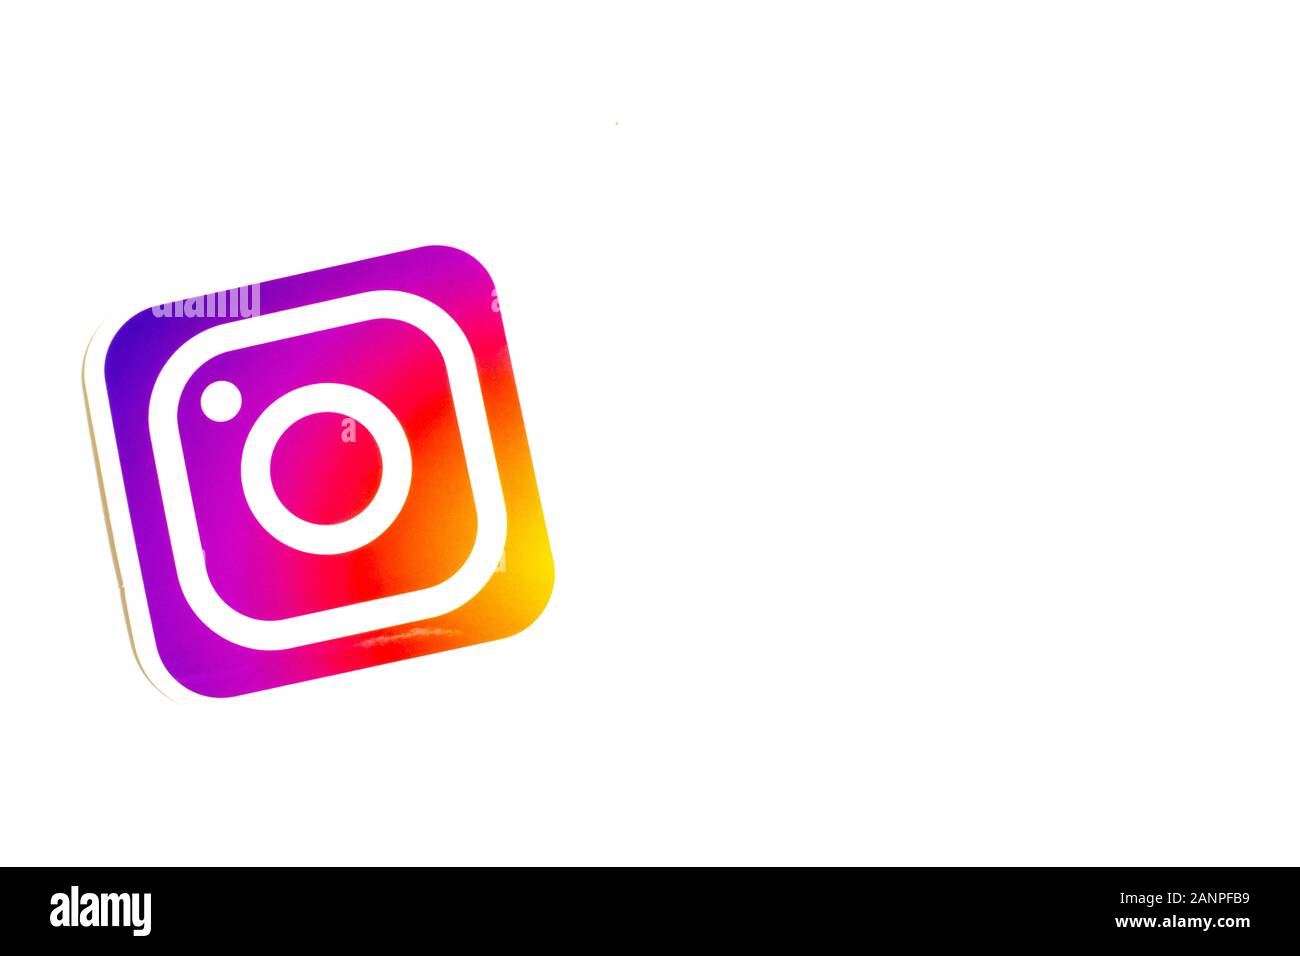 Instagram logo Cut Out Stock Images & Pictures - Alamy